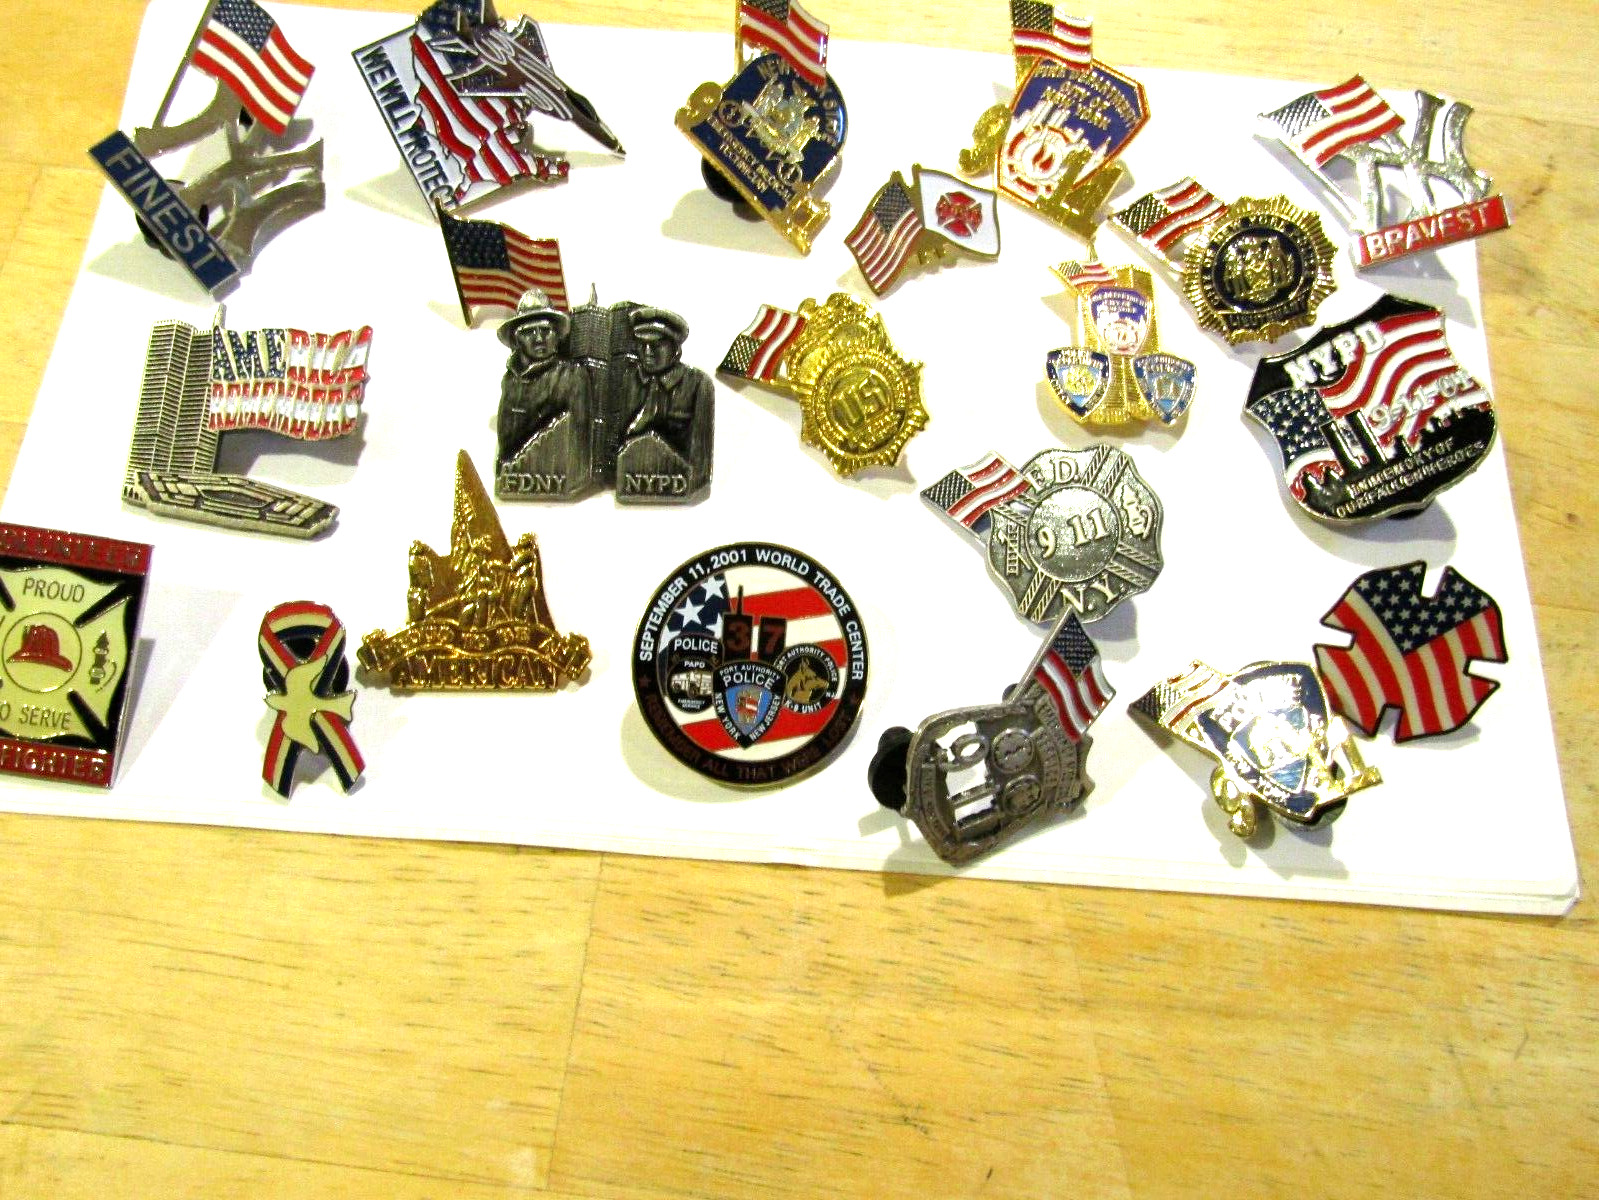 Lot of 21 9/11 Commemorative LAPEL PINS FDNY NYPD EMS EMT 911 First Responders